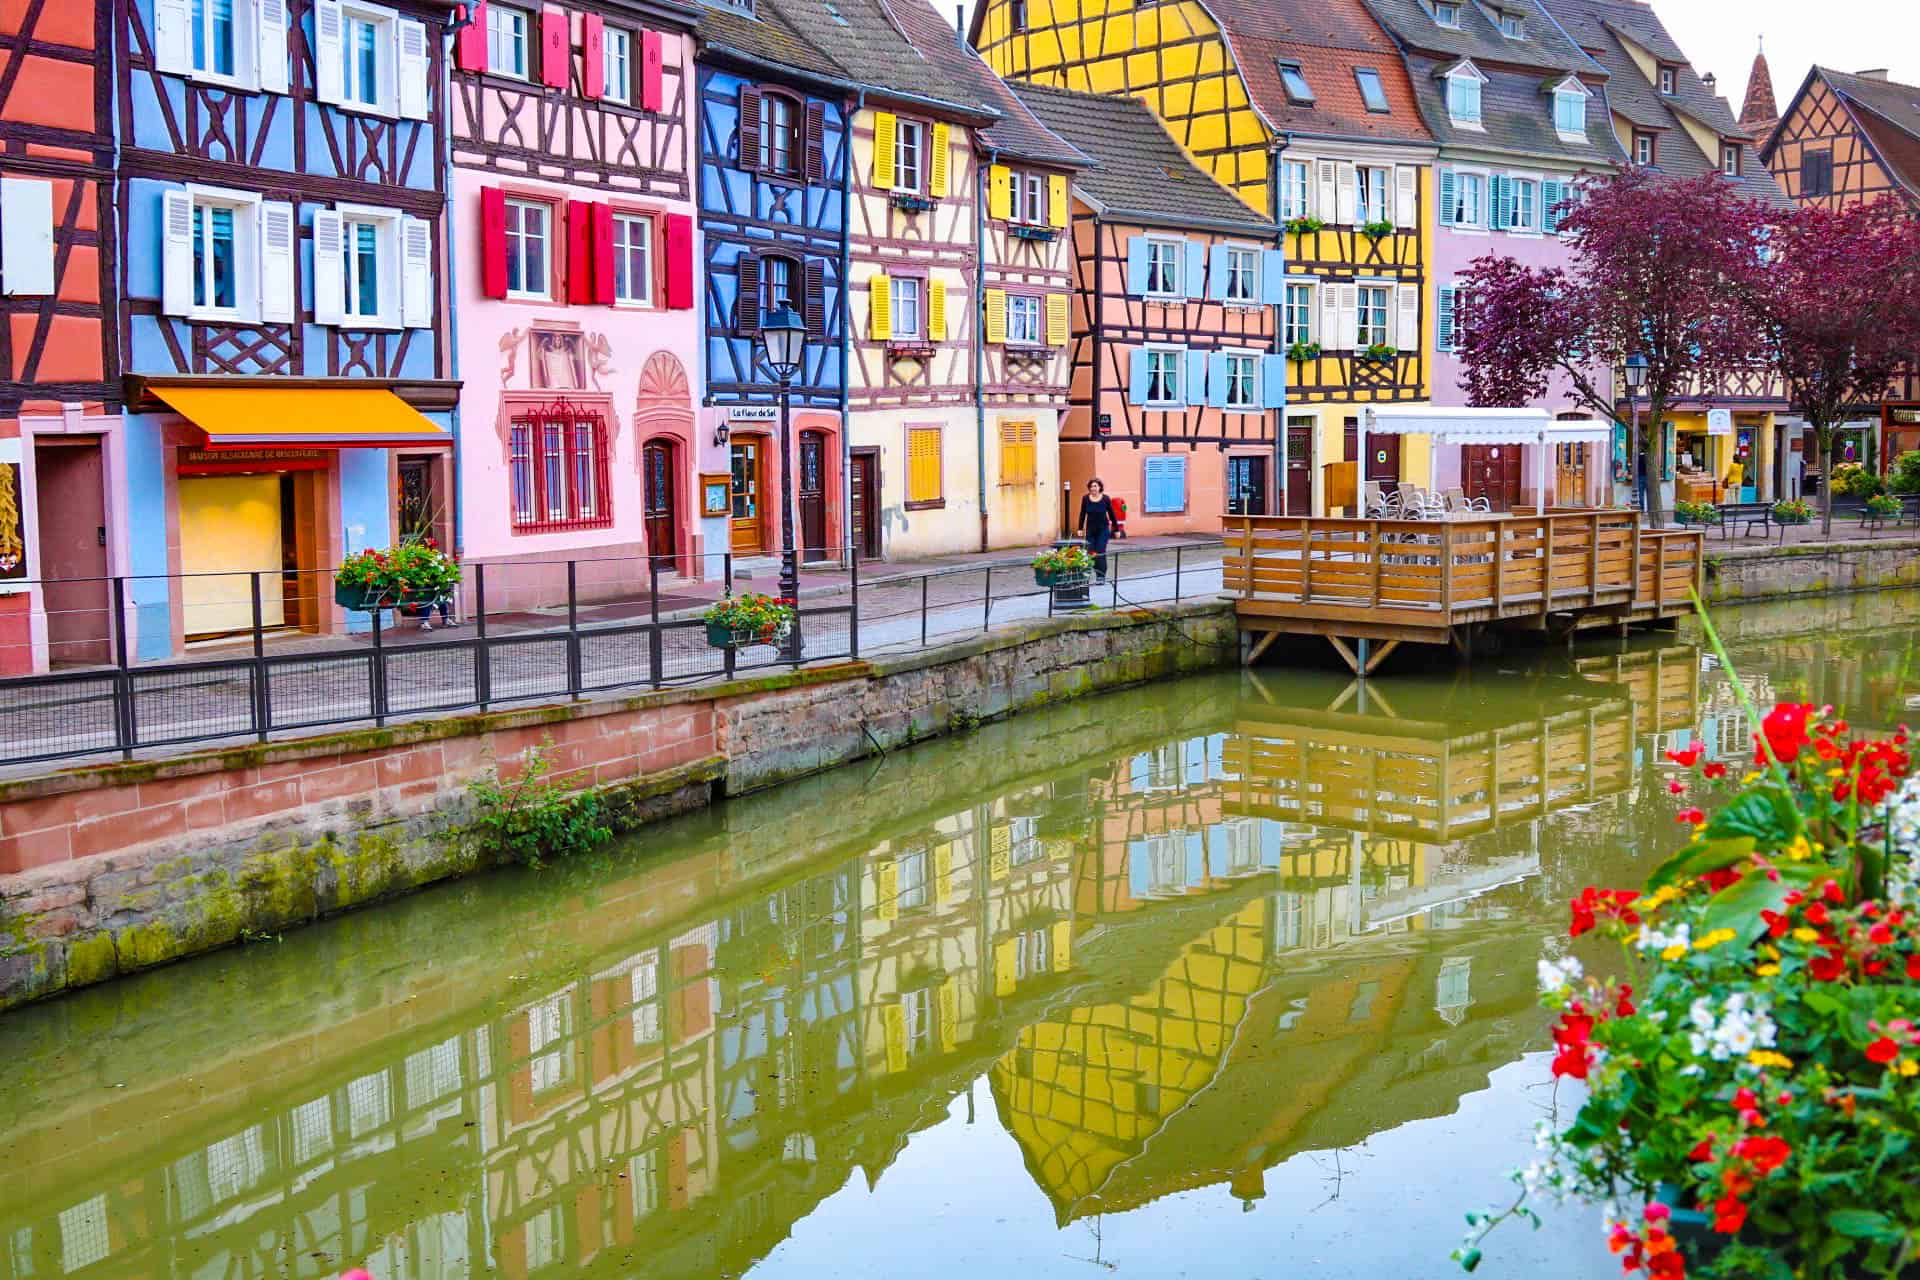 How to spend a magical one day in Colmar old town